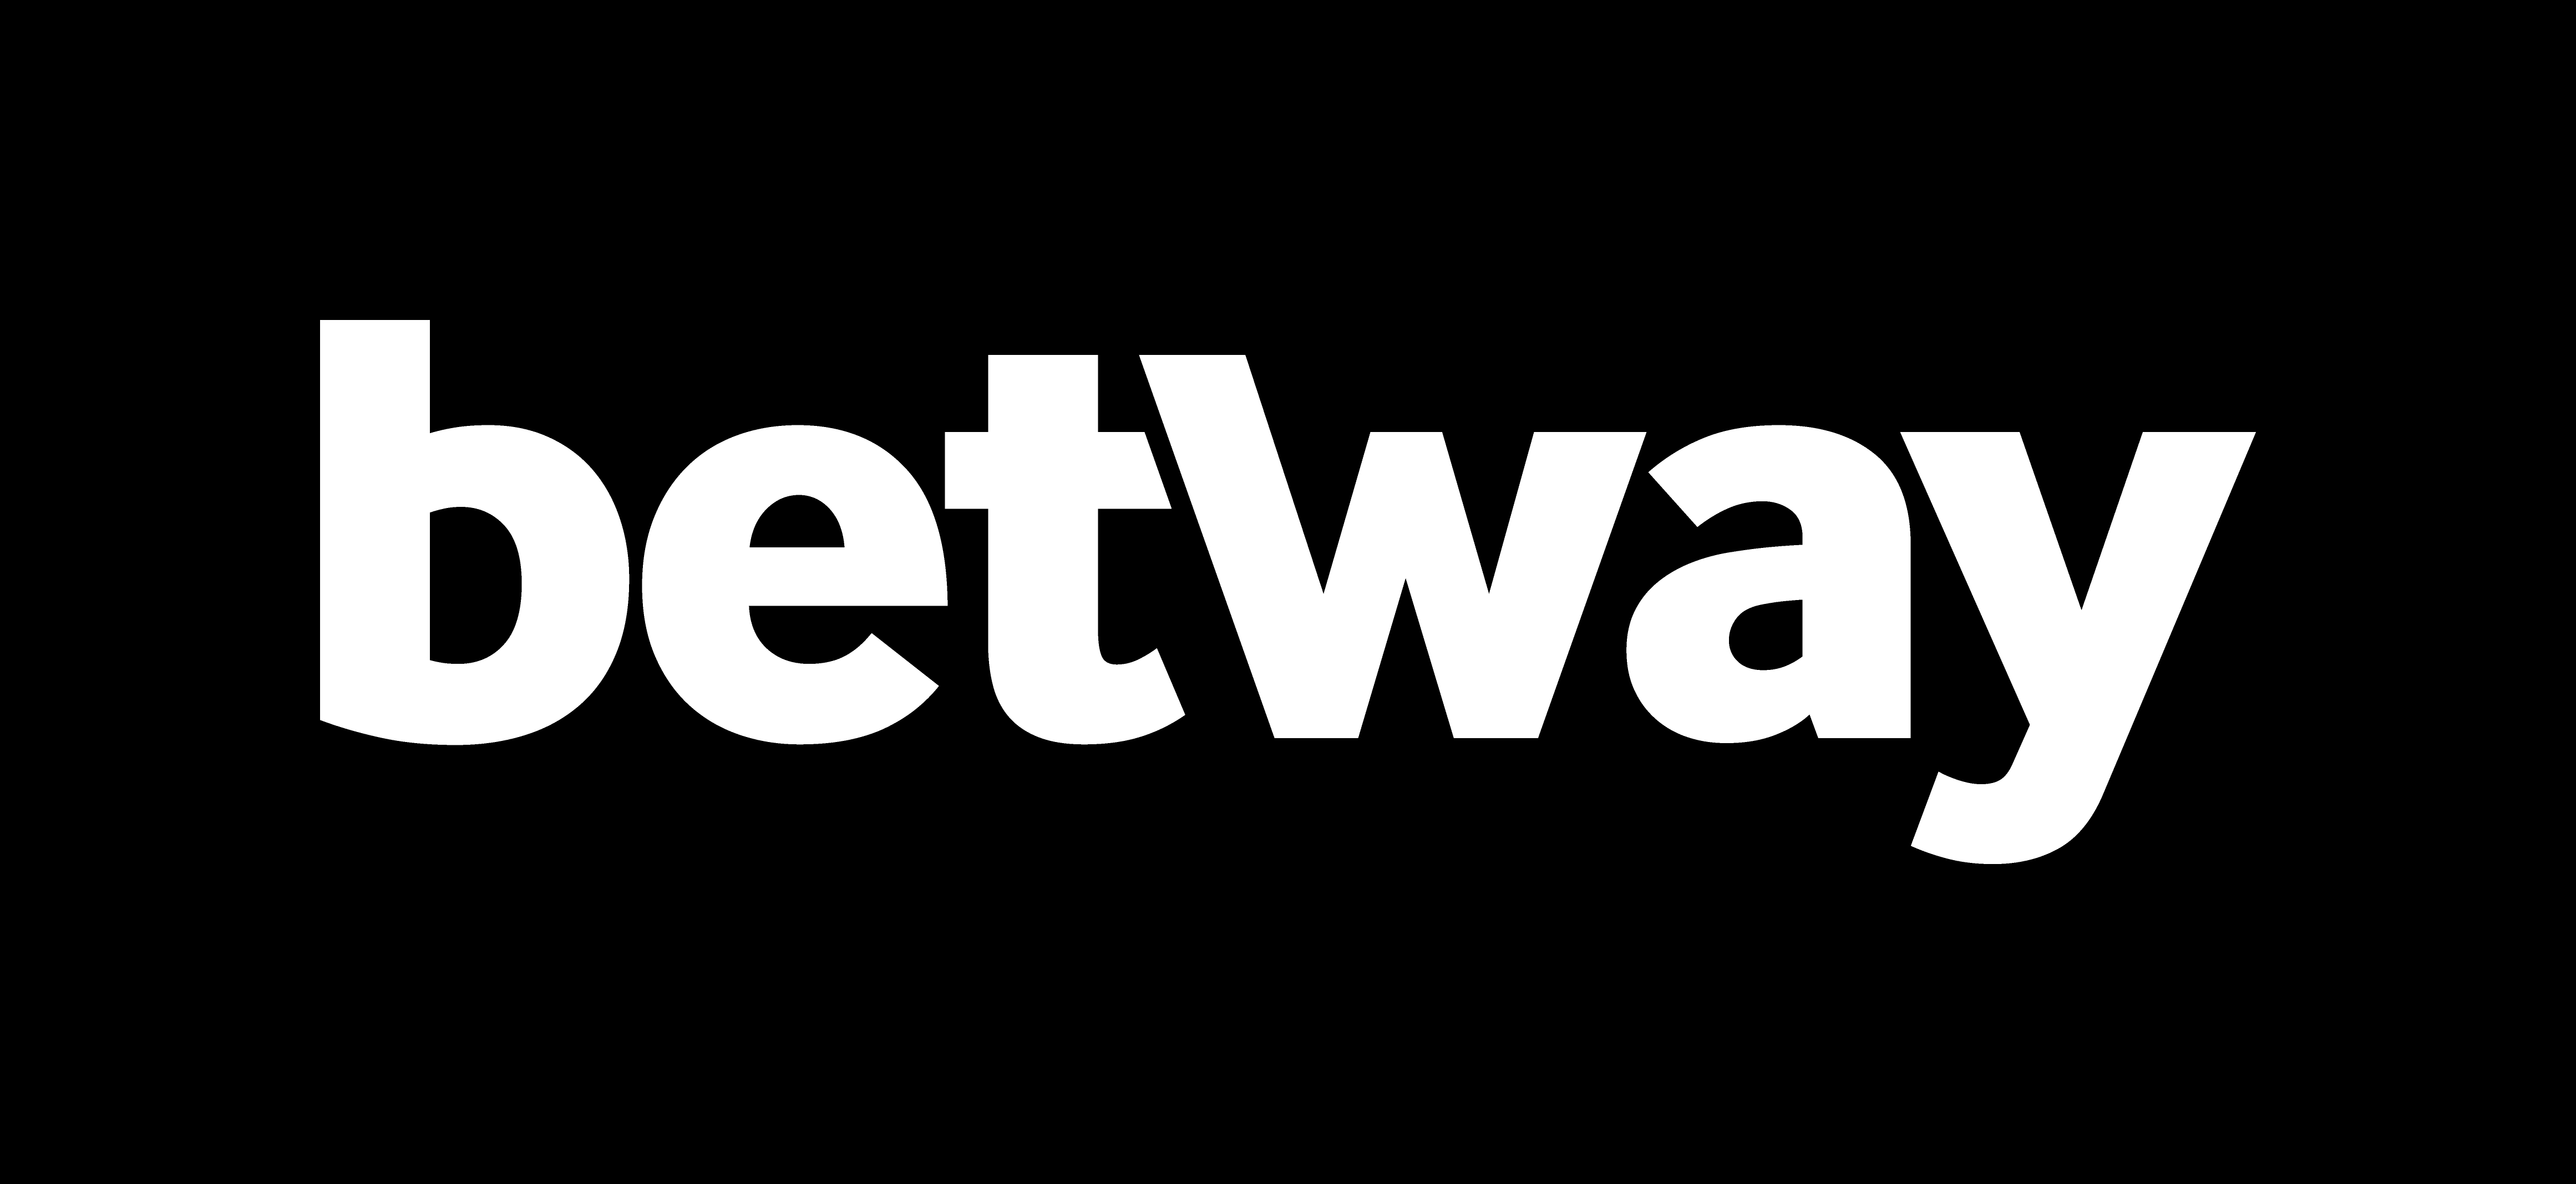 Betway Secures Global Betting Partner Deal with Arsenal FC